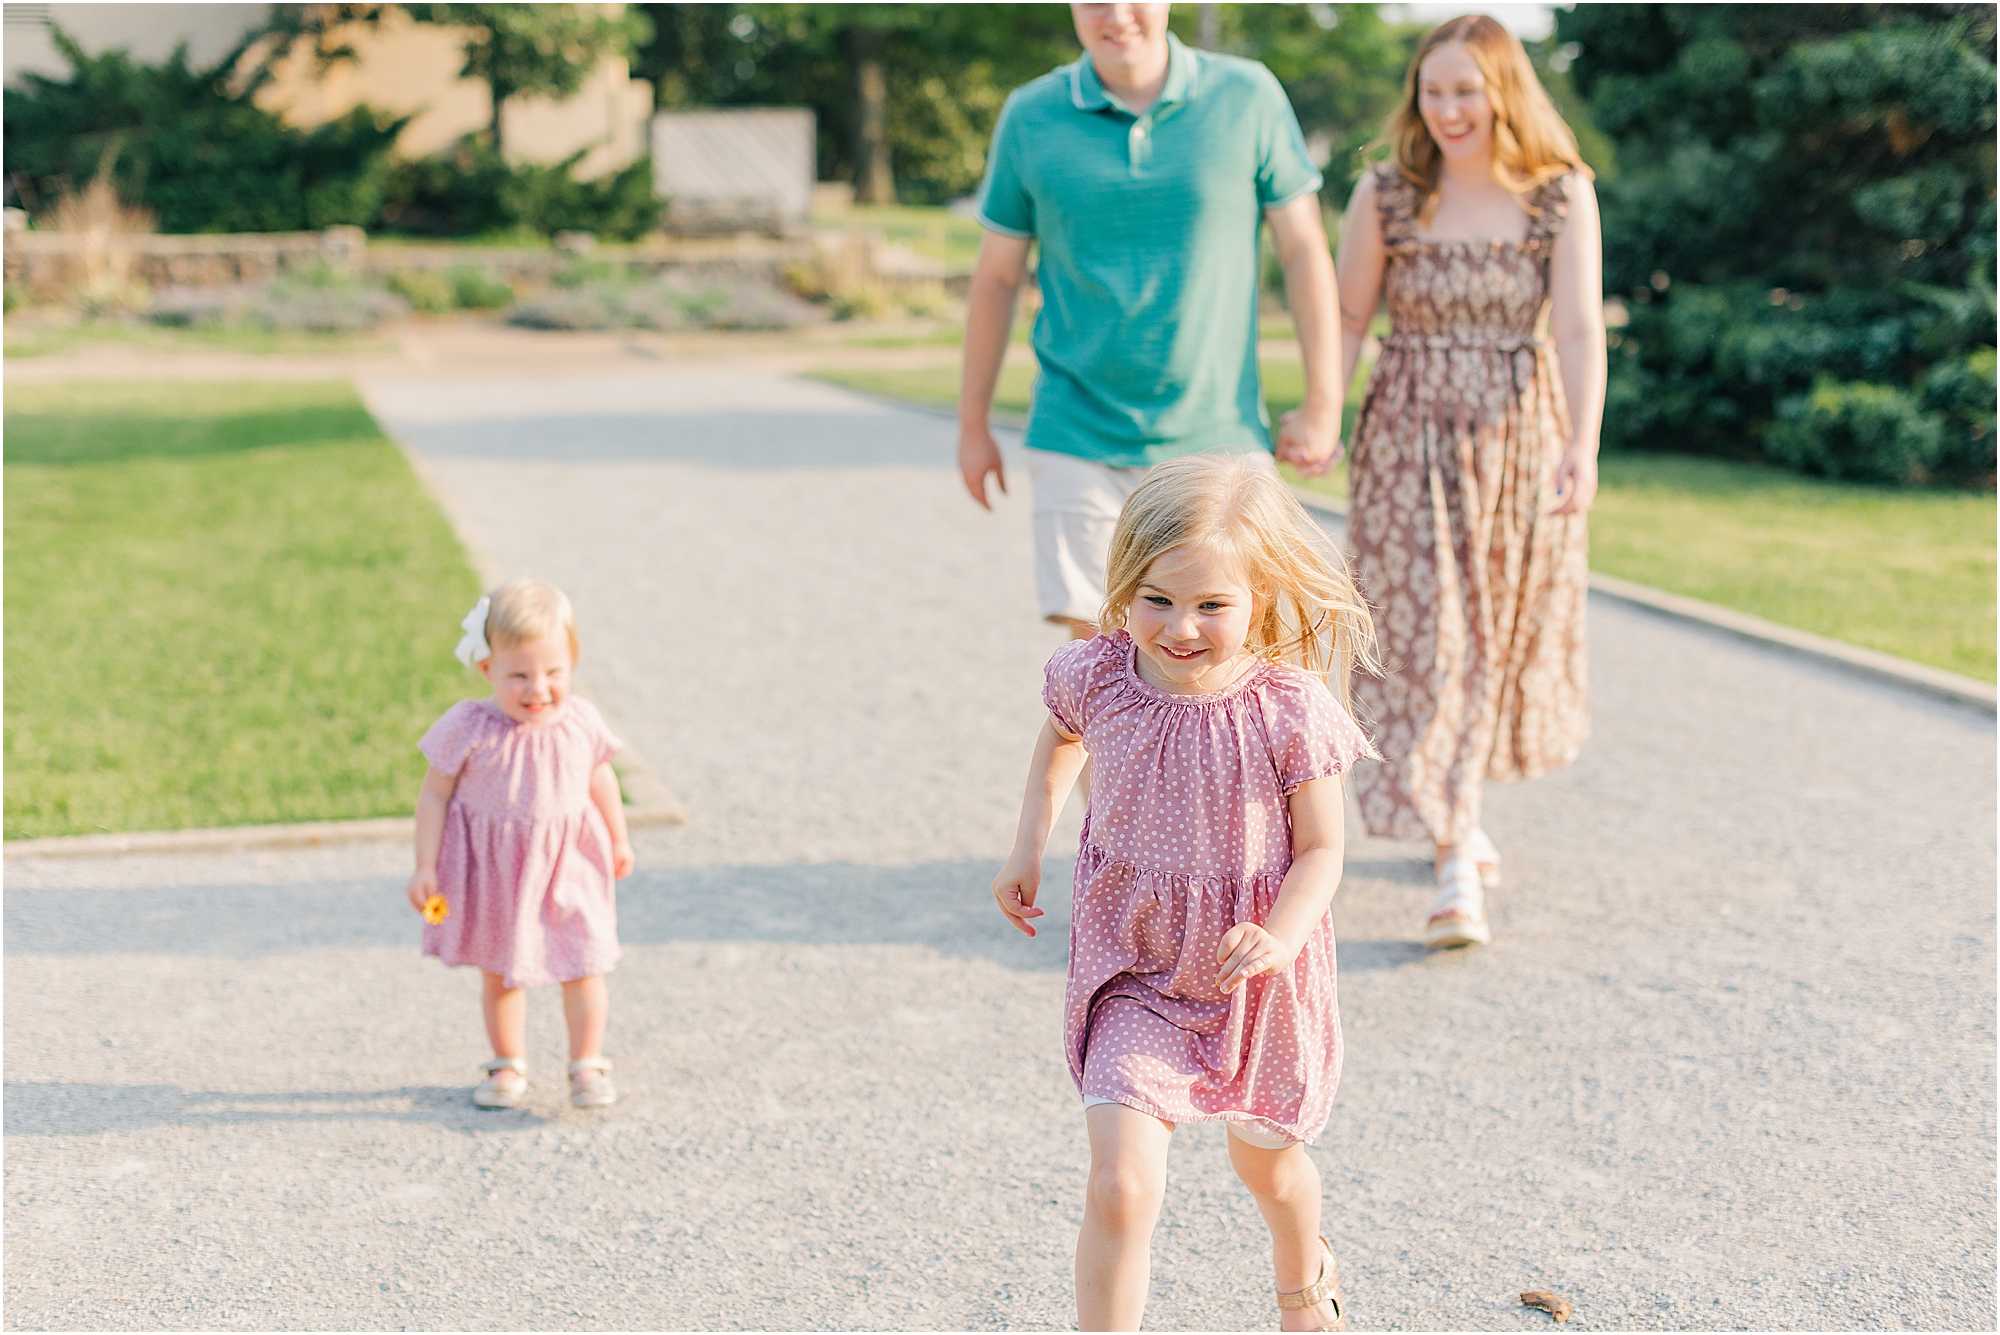 Running down the path during a summer family photo session.